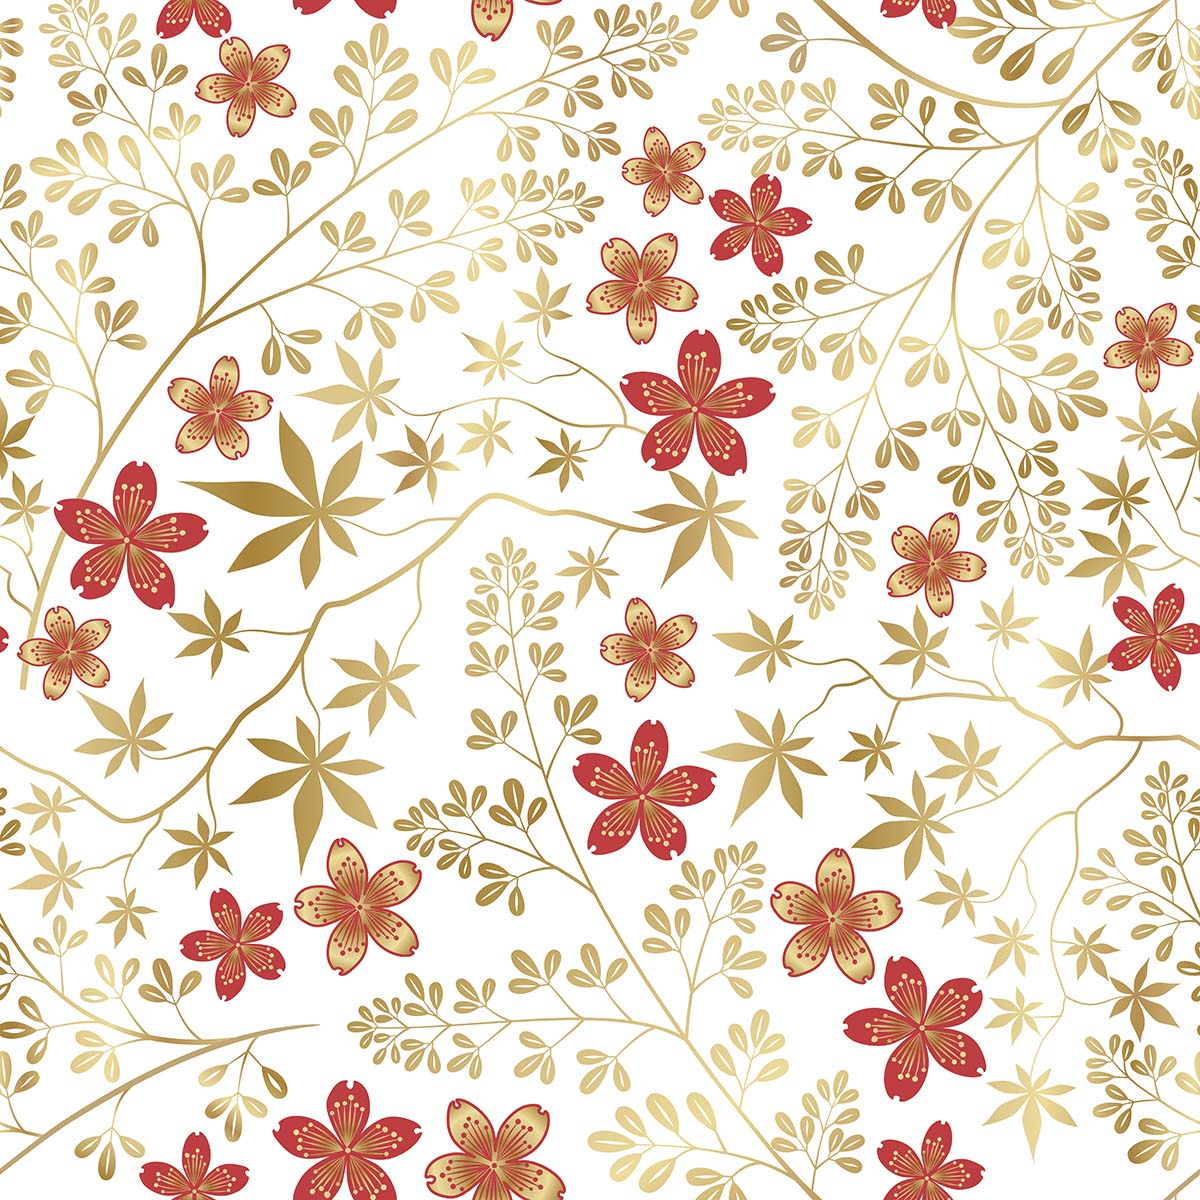 A pattern of red and gold flowers